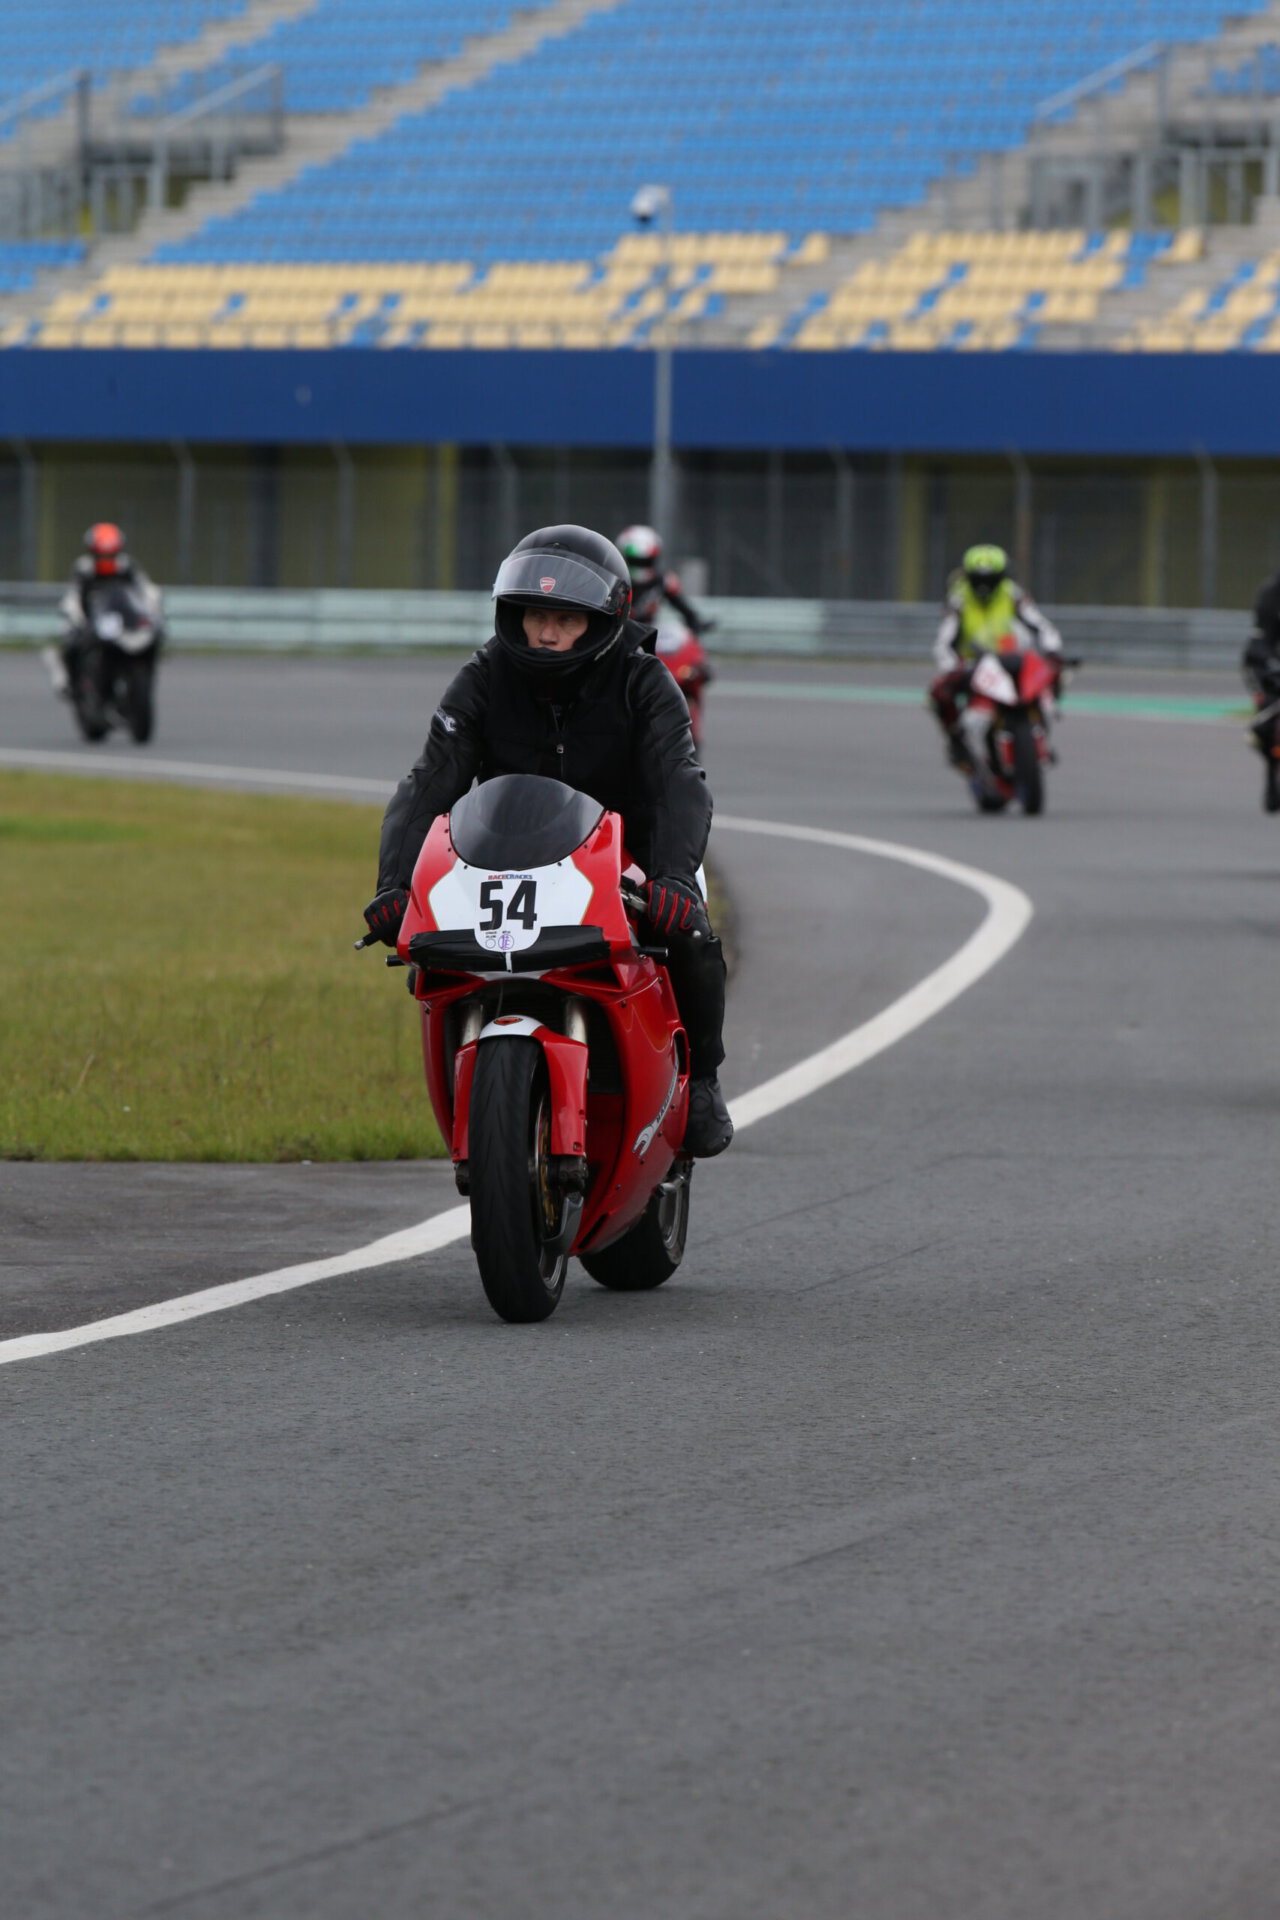 Back to the track – third time is a charm – TT Circuit Assen, July 27th 2020